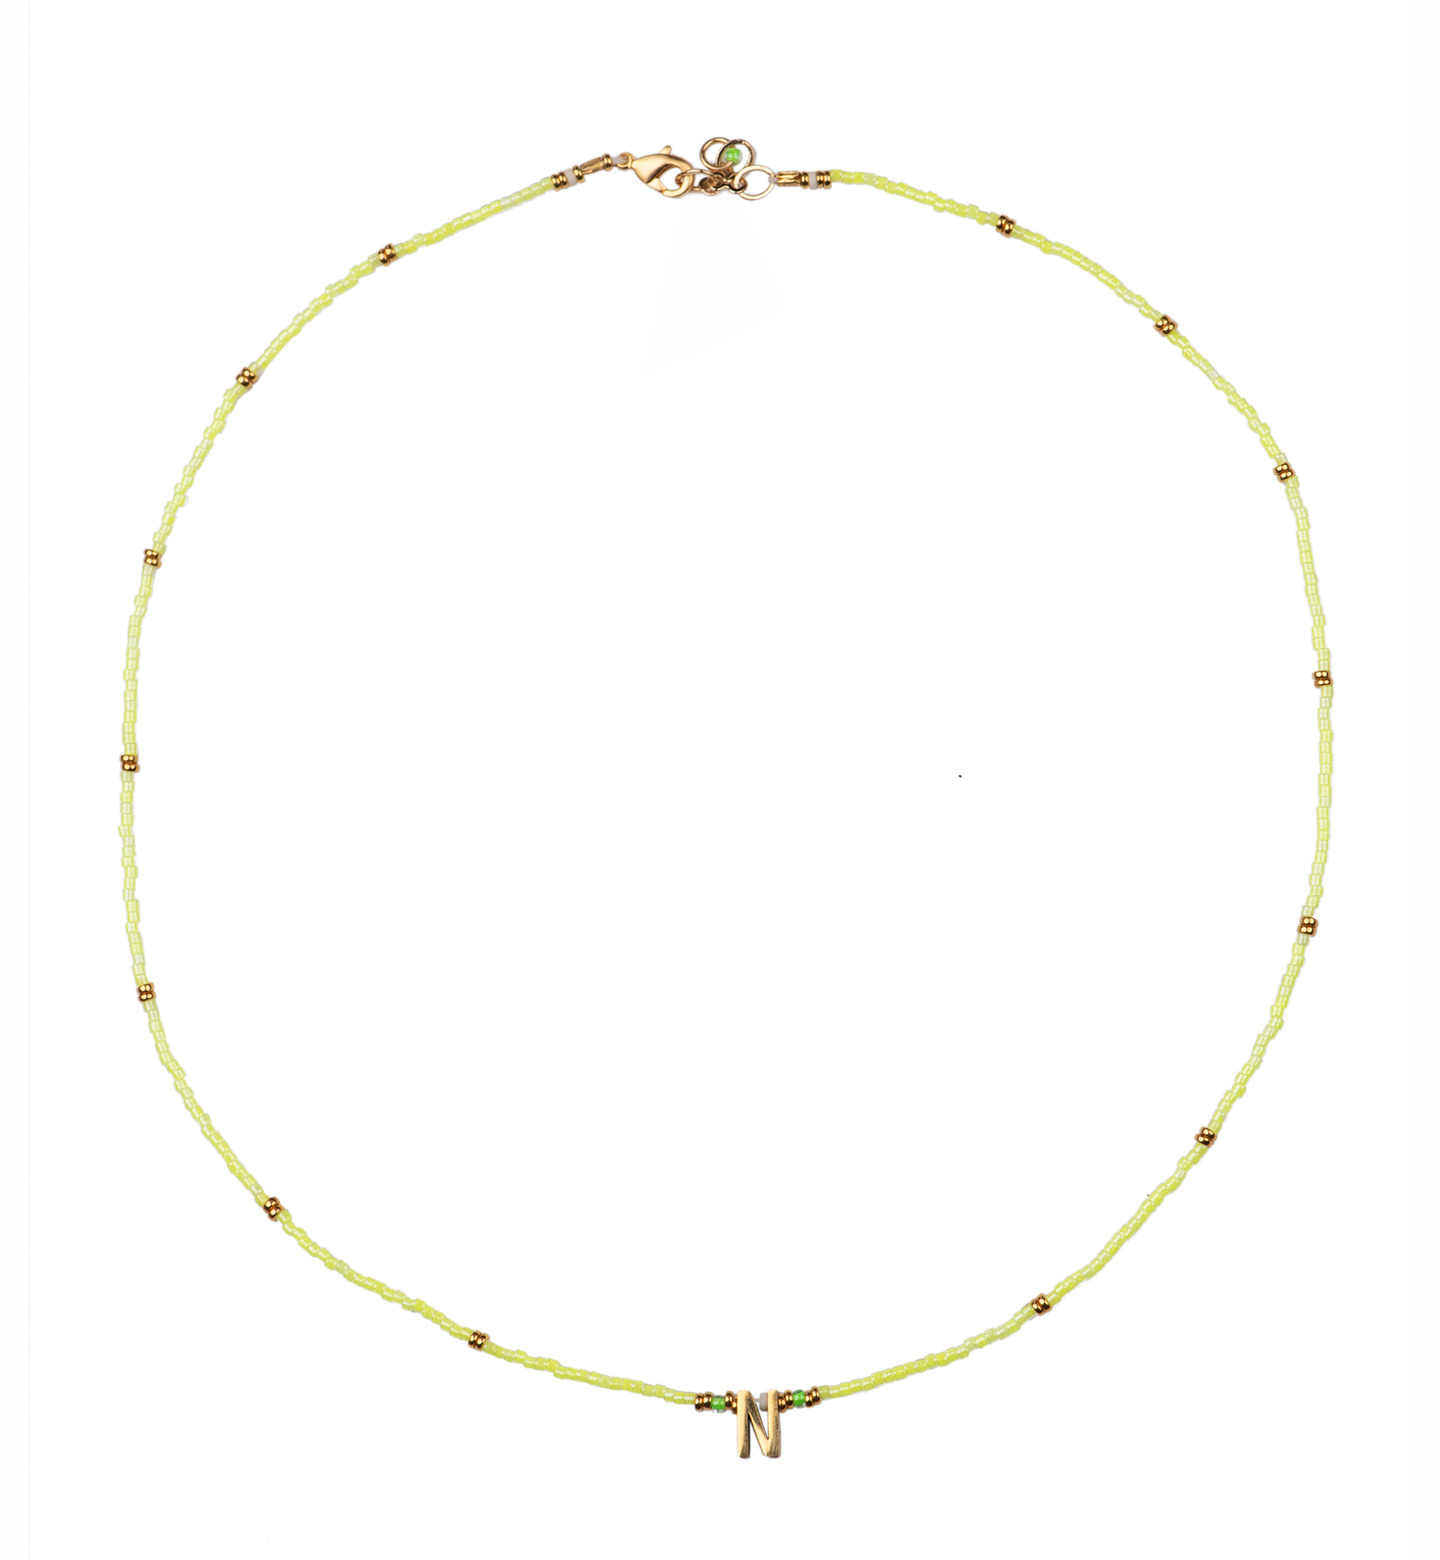 Summer Letter Fluoro Pearl Bead Necklace